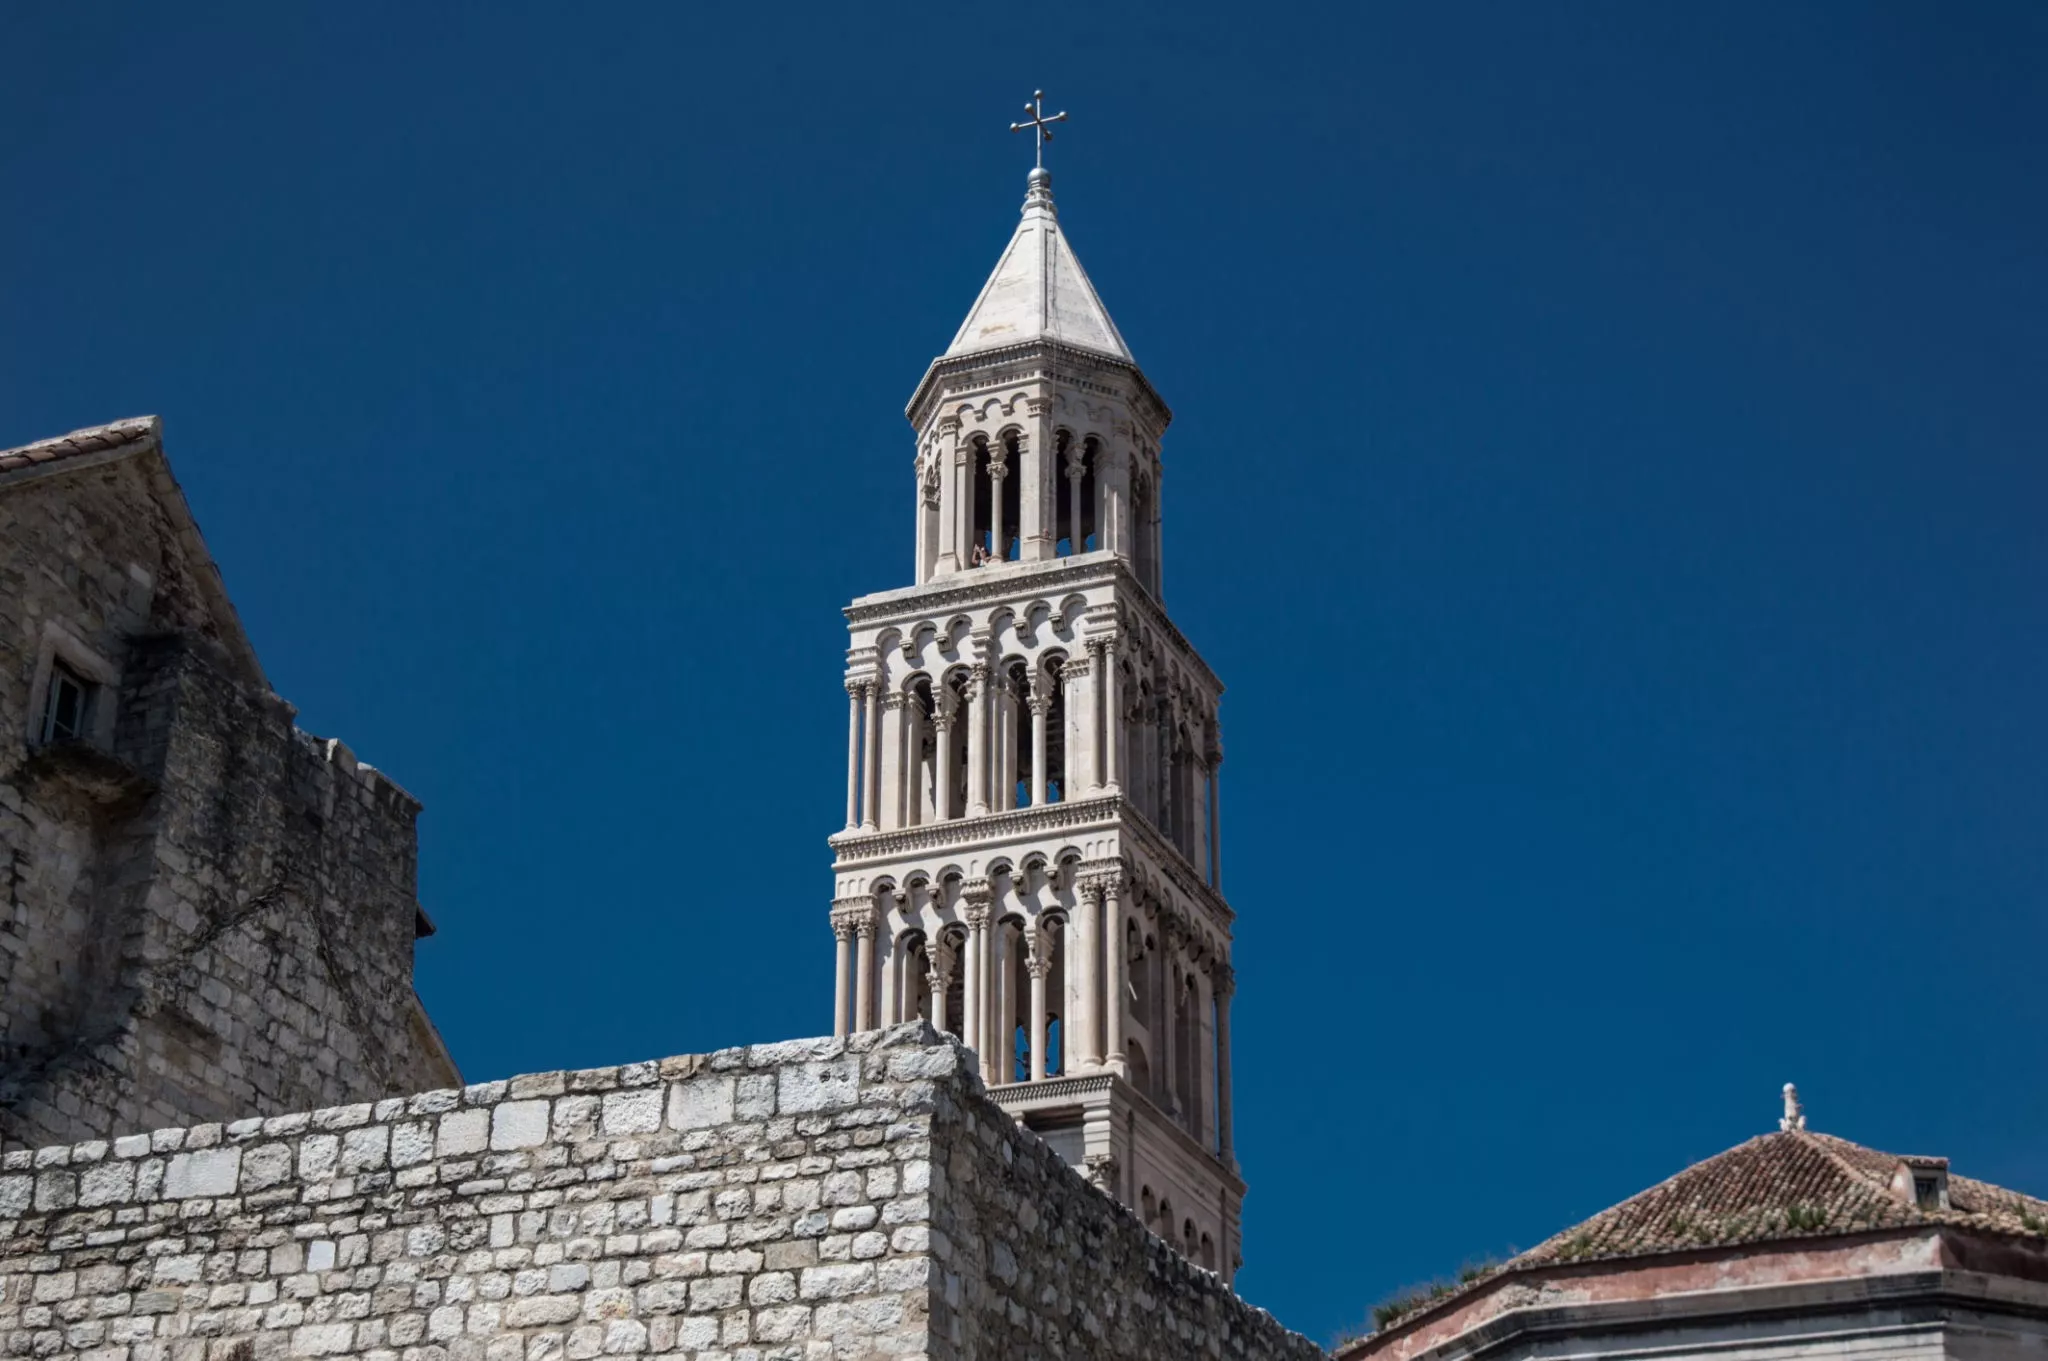 Saint Domnius Bell Tower in Croatia, Europe | Architecture - Rated 0.8